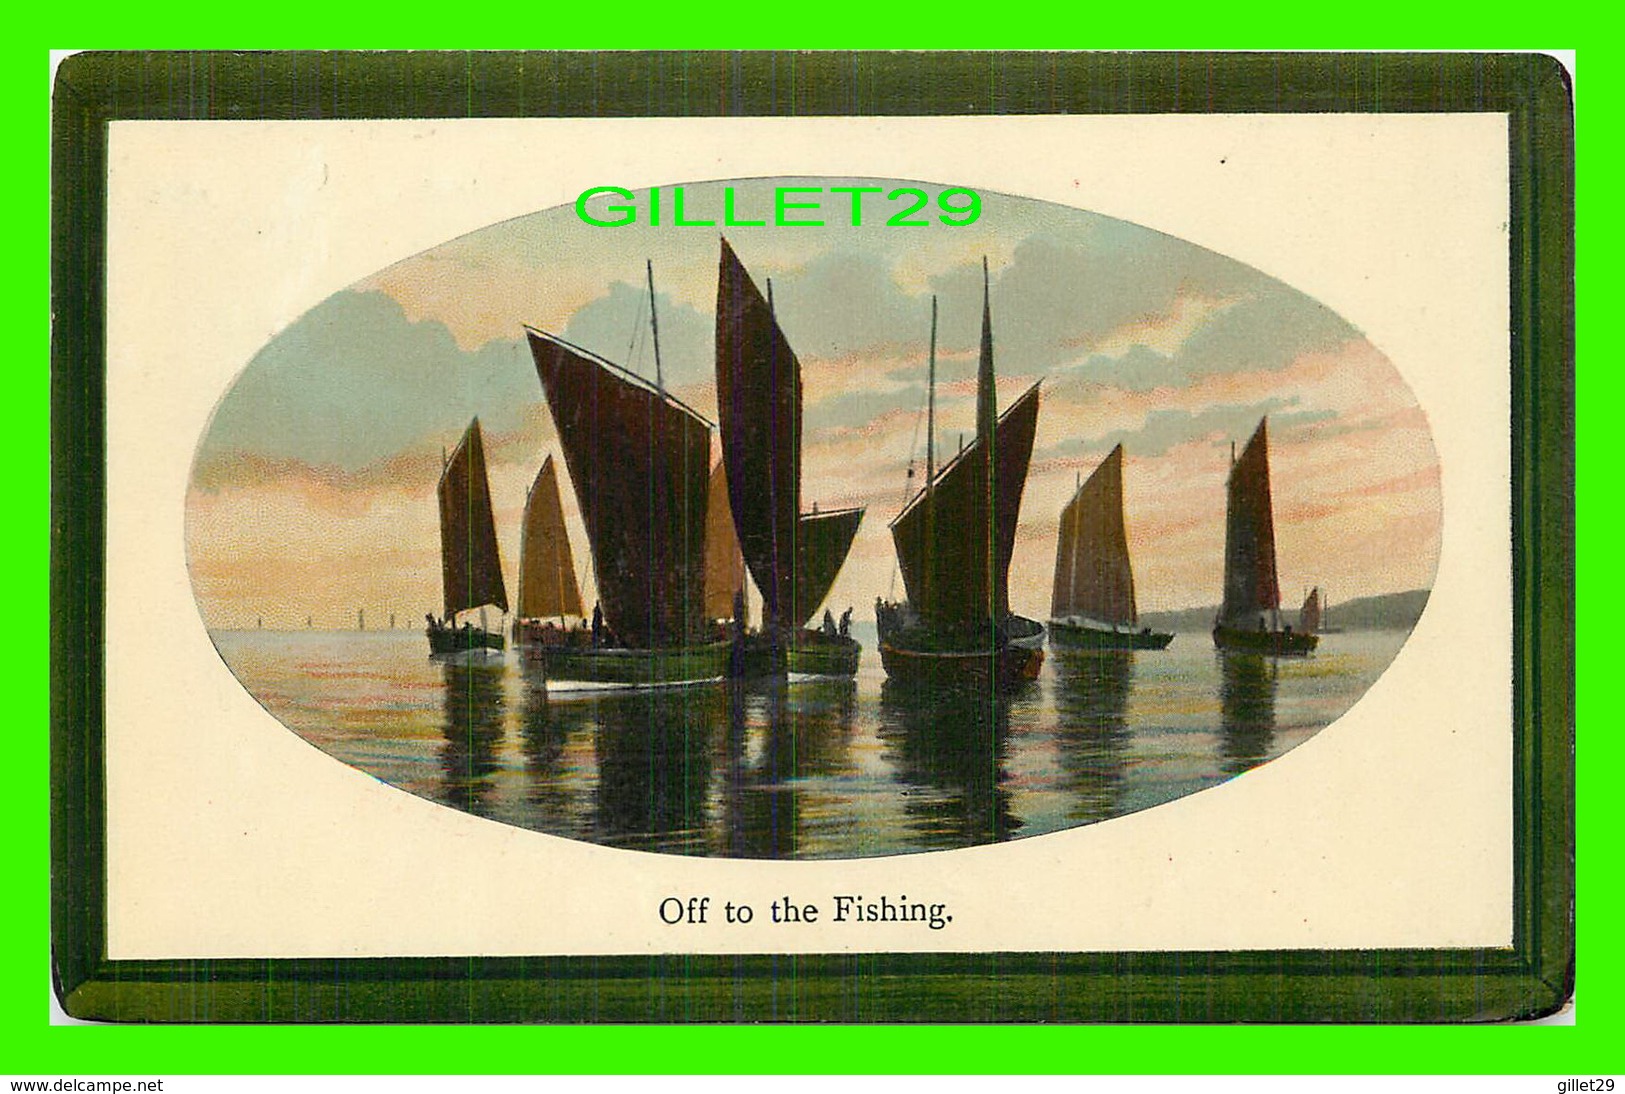 SAILS, VOILIERS - OFF TO THE FISHING - TRAVEL IN 1910 - NATIONAL SERIES - - Voiliers